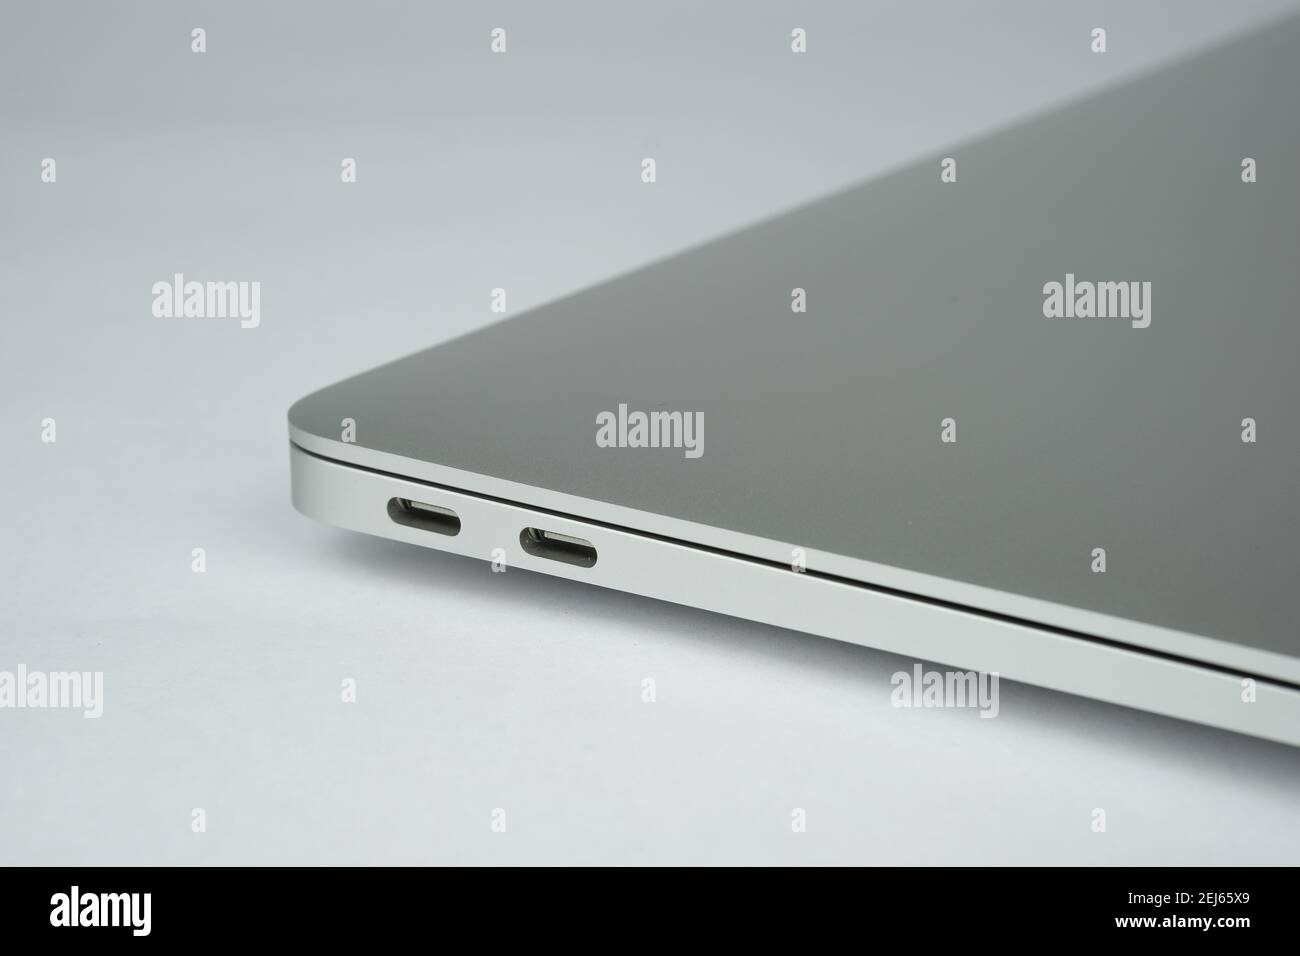 Apple MacBook Air M1 laptop with visible USB C ports. Stafford, United  Kingdom, February 21, 2021 Stock Photo - Alamy